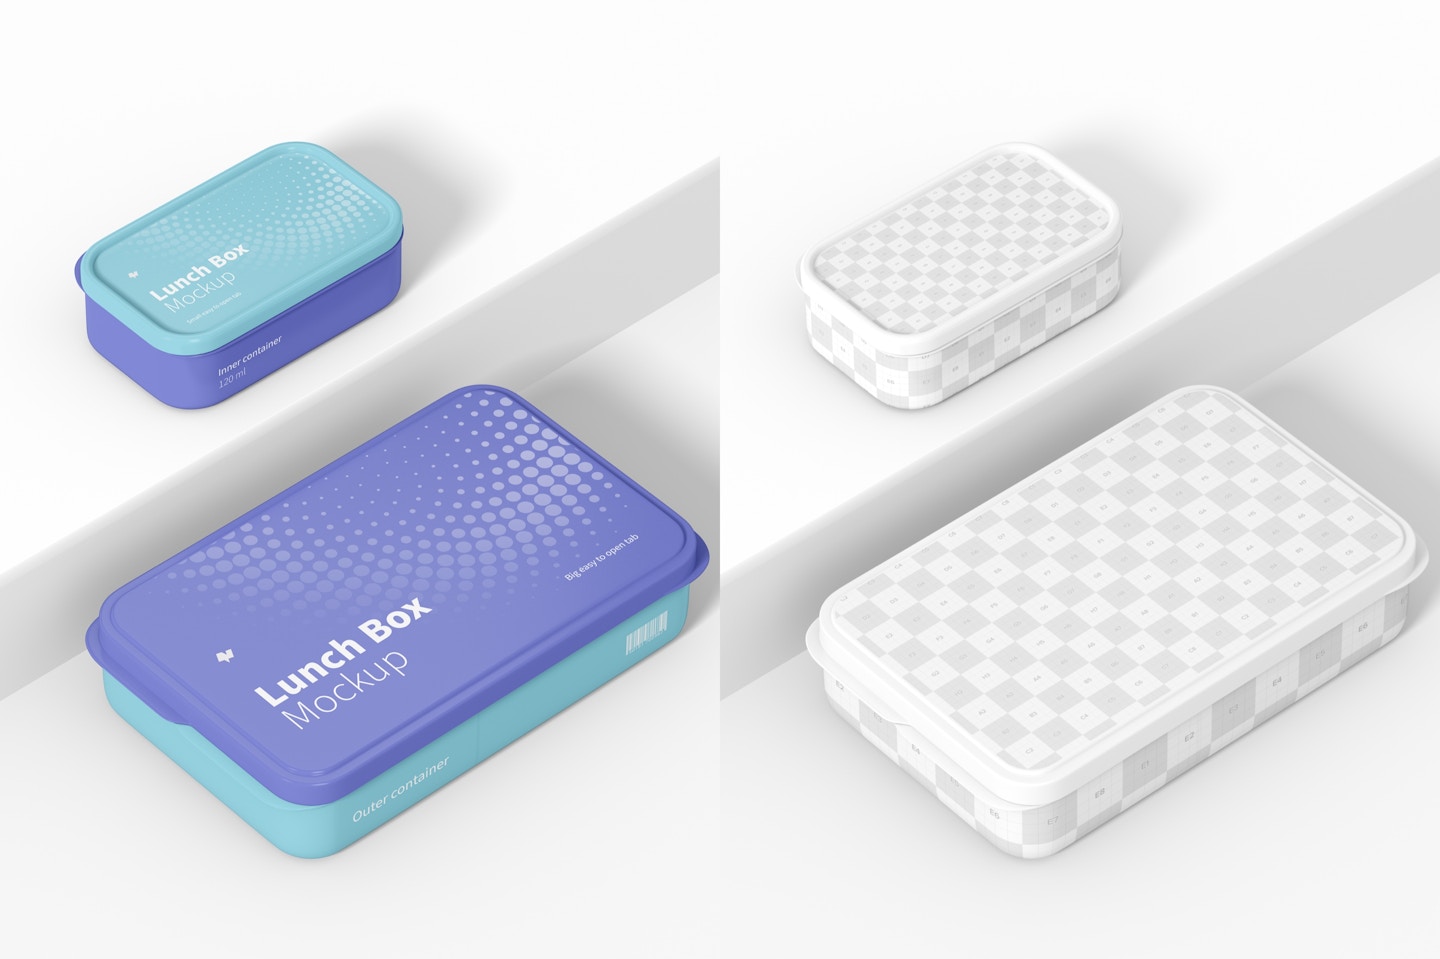 Lunch Boxes Mockup, Perspective View